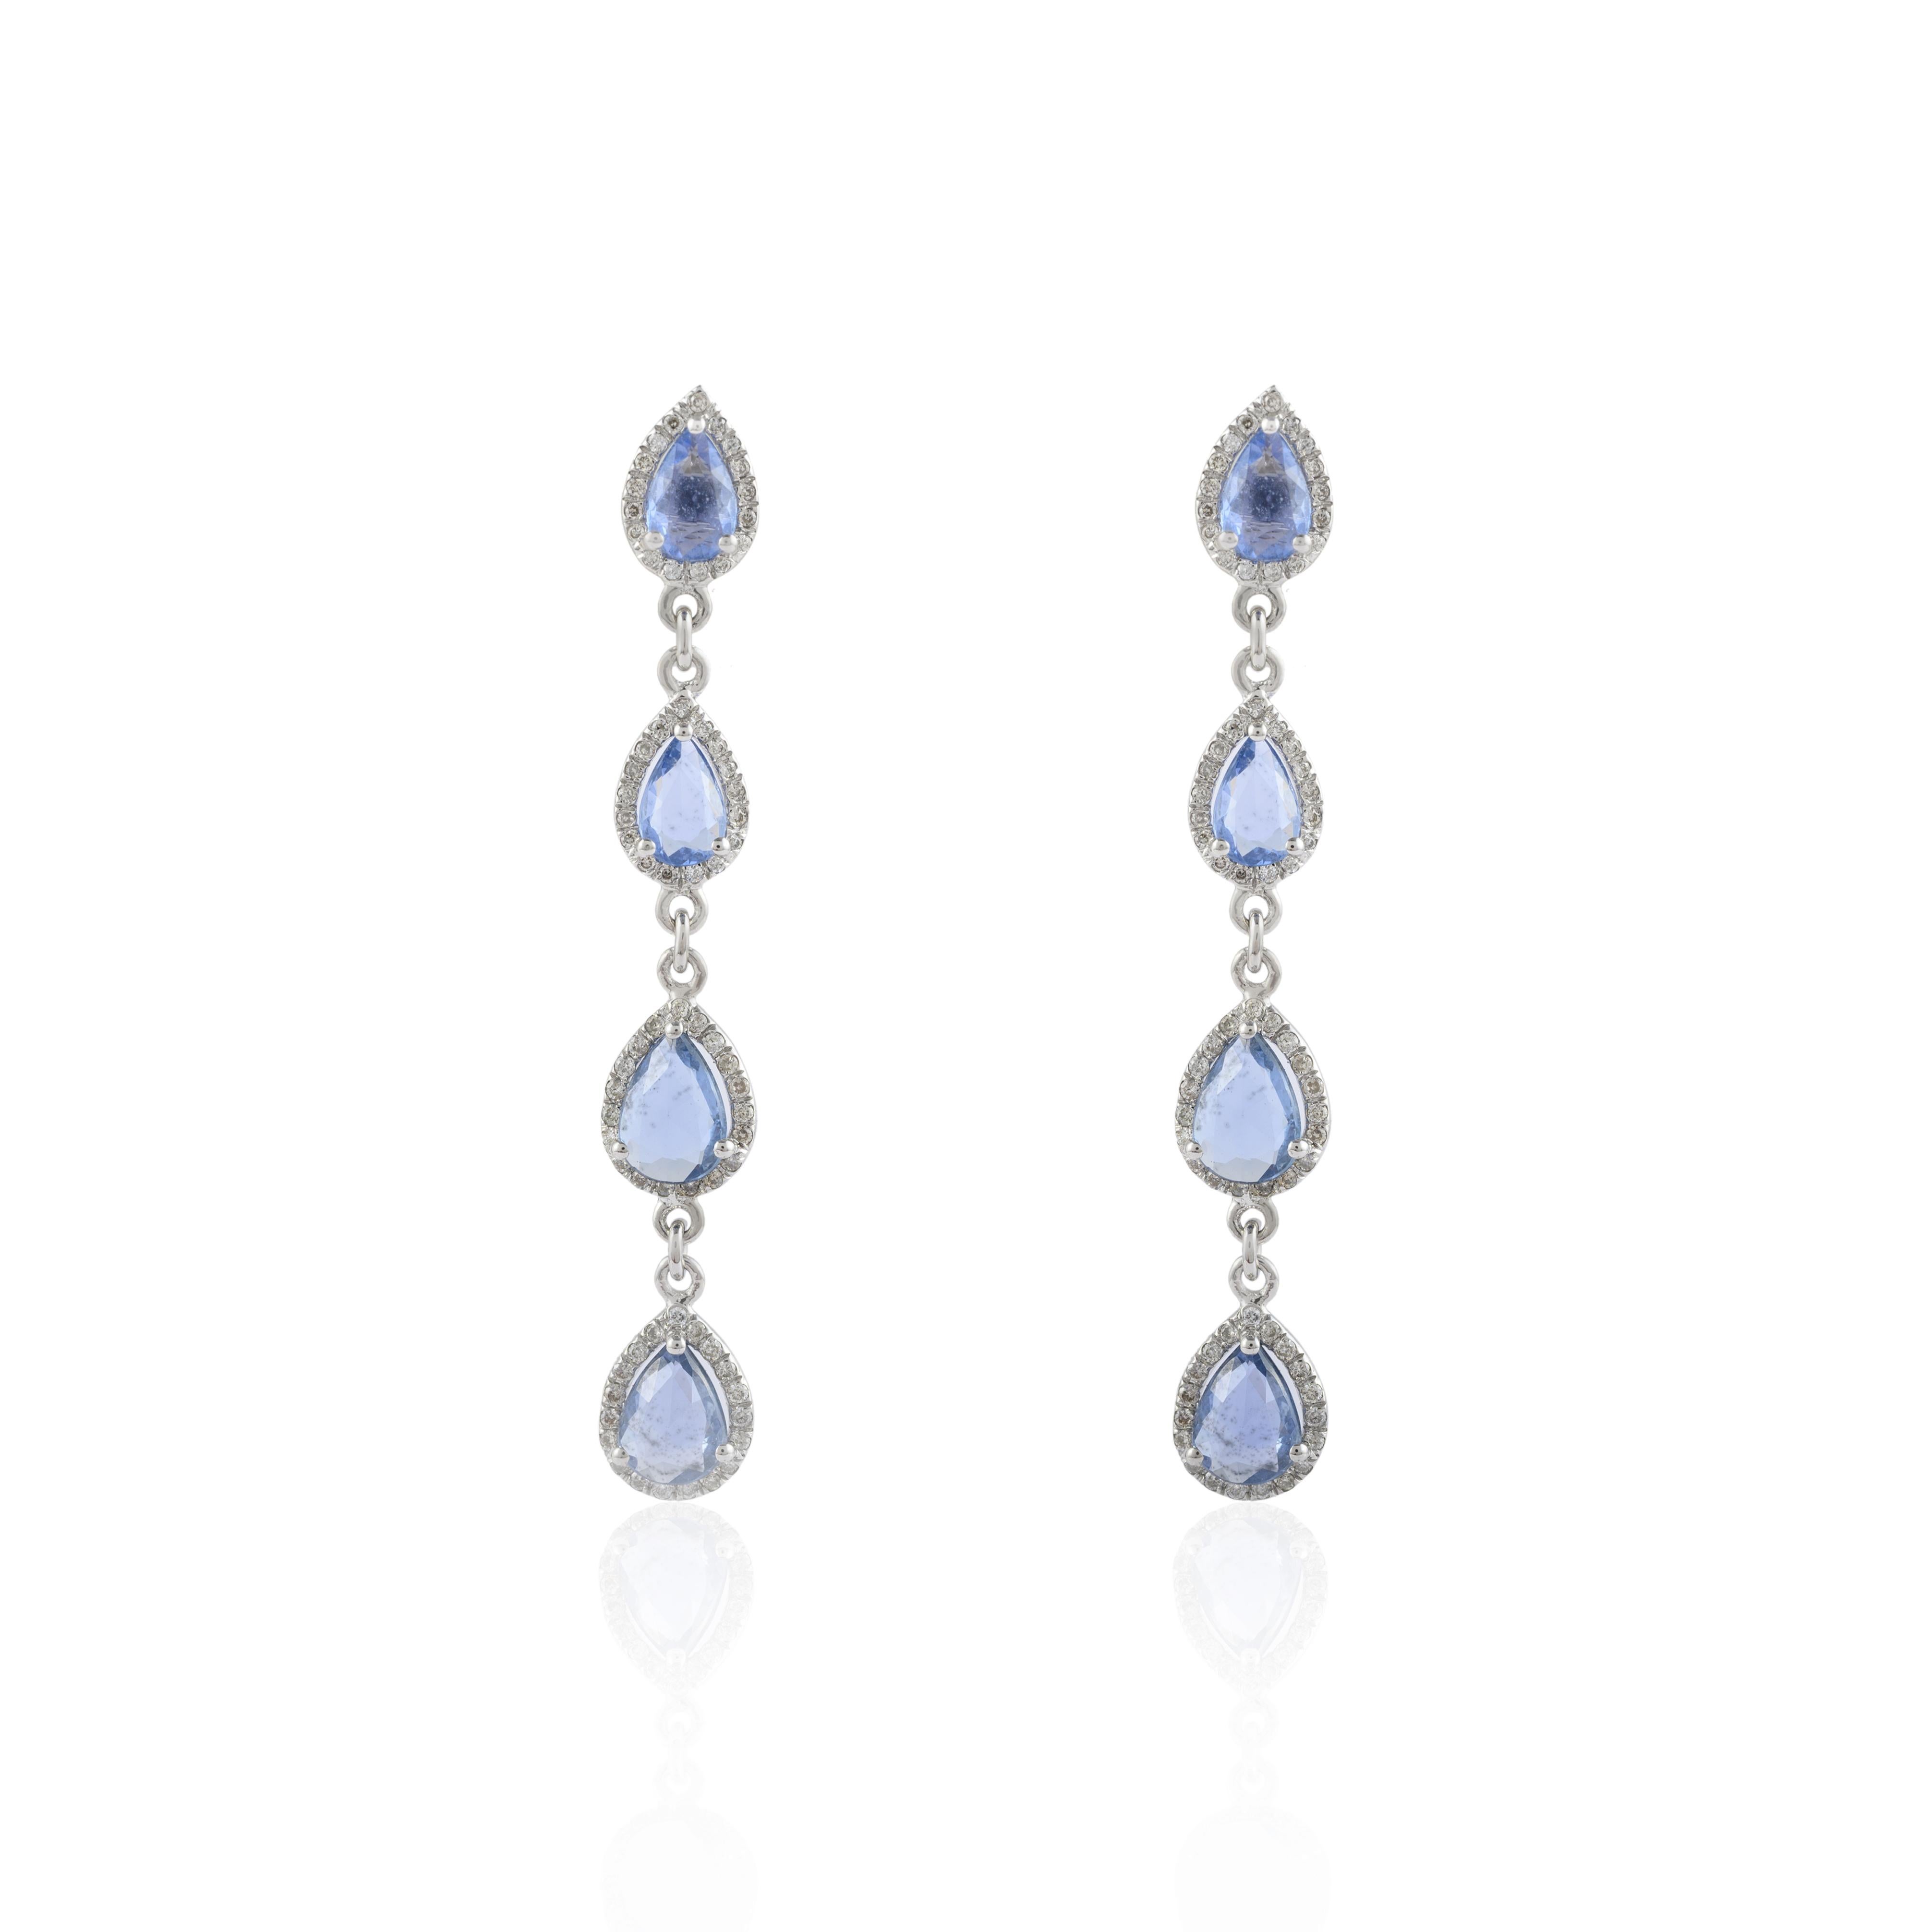 Diamond Blue Sapphire Long Dangle Earrings in 14K Gold to make a statement with your look. These earrings create a sparkling, luxurious look featuring pear cut gemstone.
Sapphire stimulates concentration and reduces stress. 
Designed with 4 pear cut